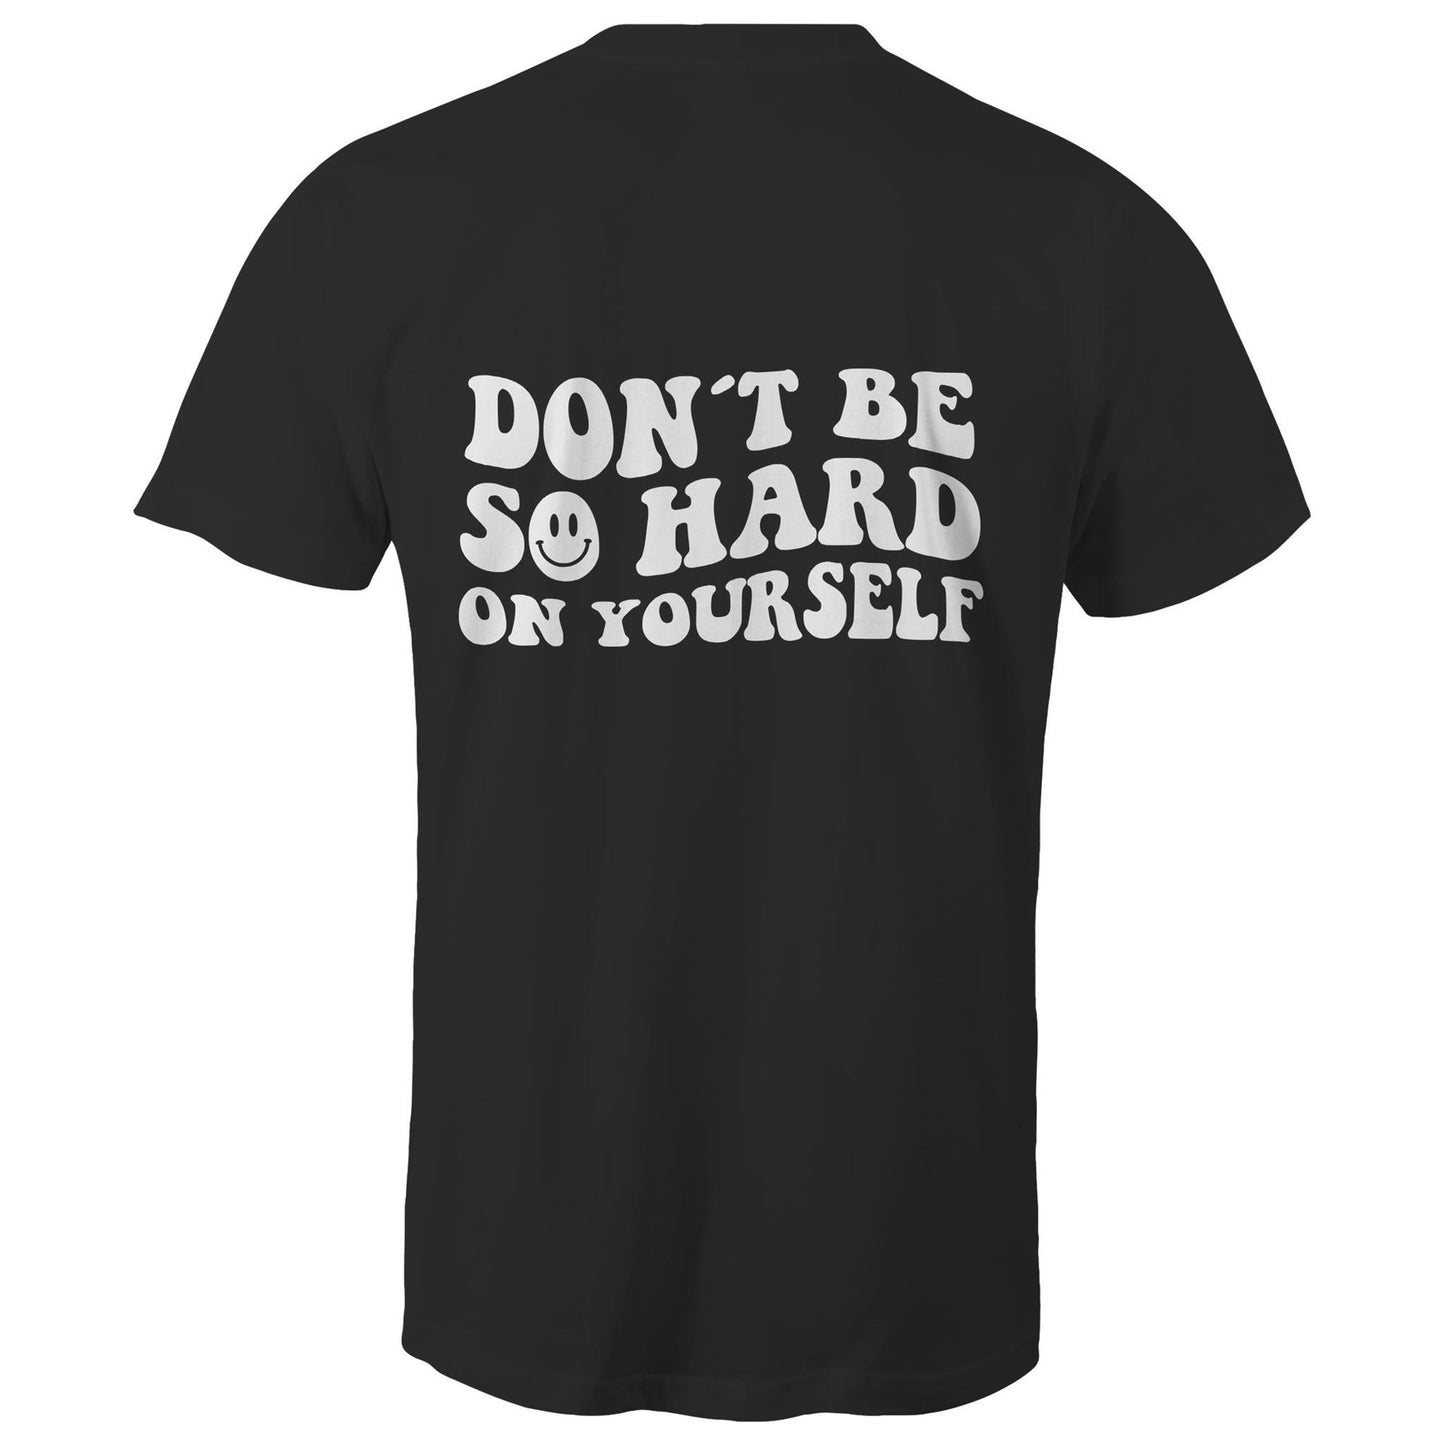 Mens T-Shirt - Dont Be So Hard On Yourself